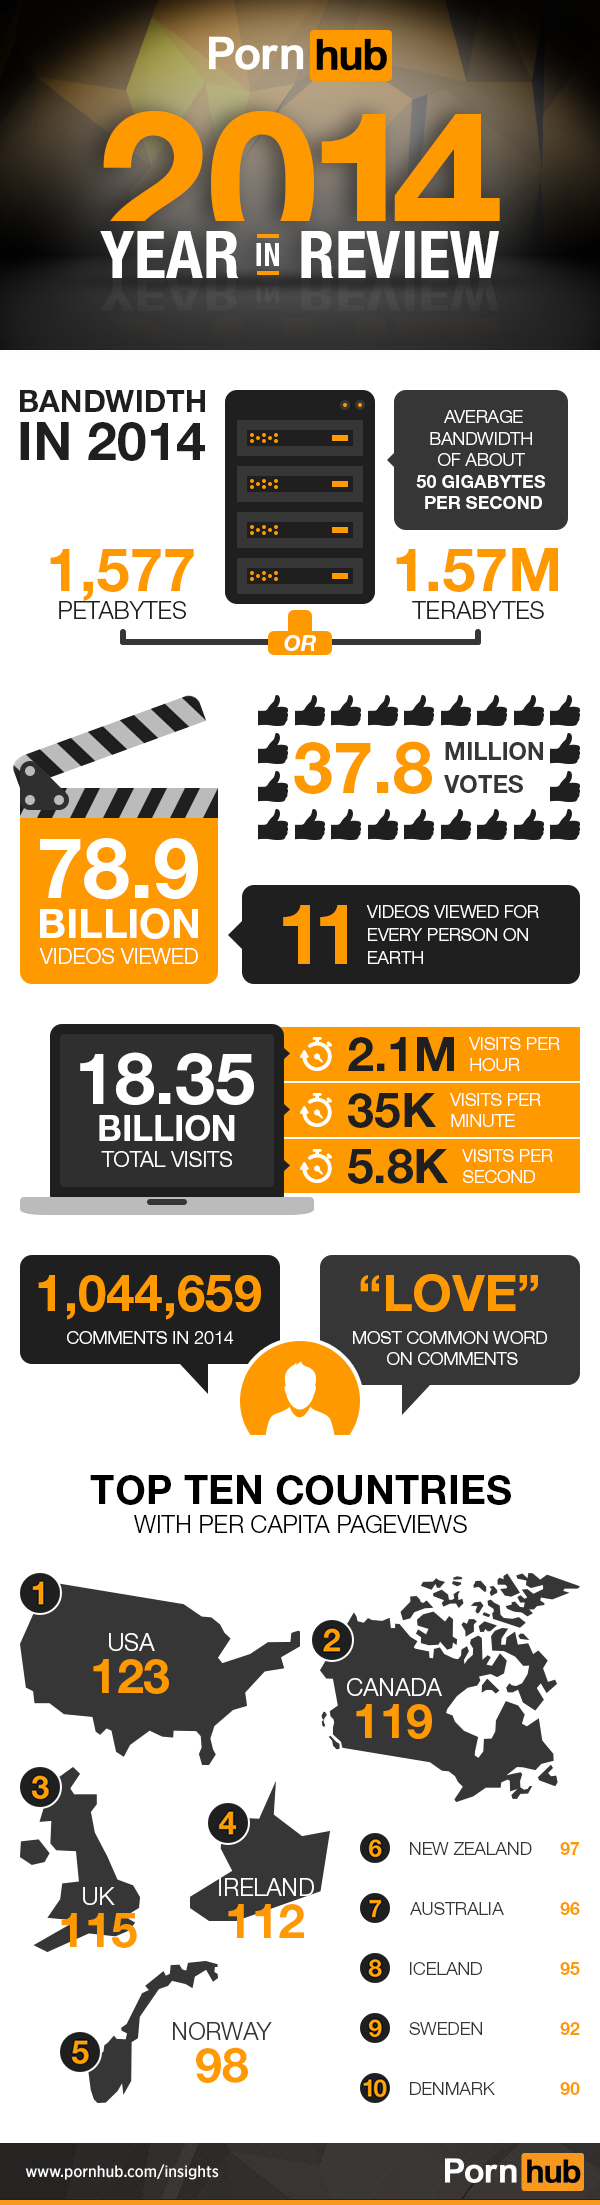 2014 Year In Review - Pornhub Insights